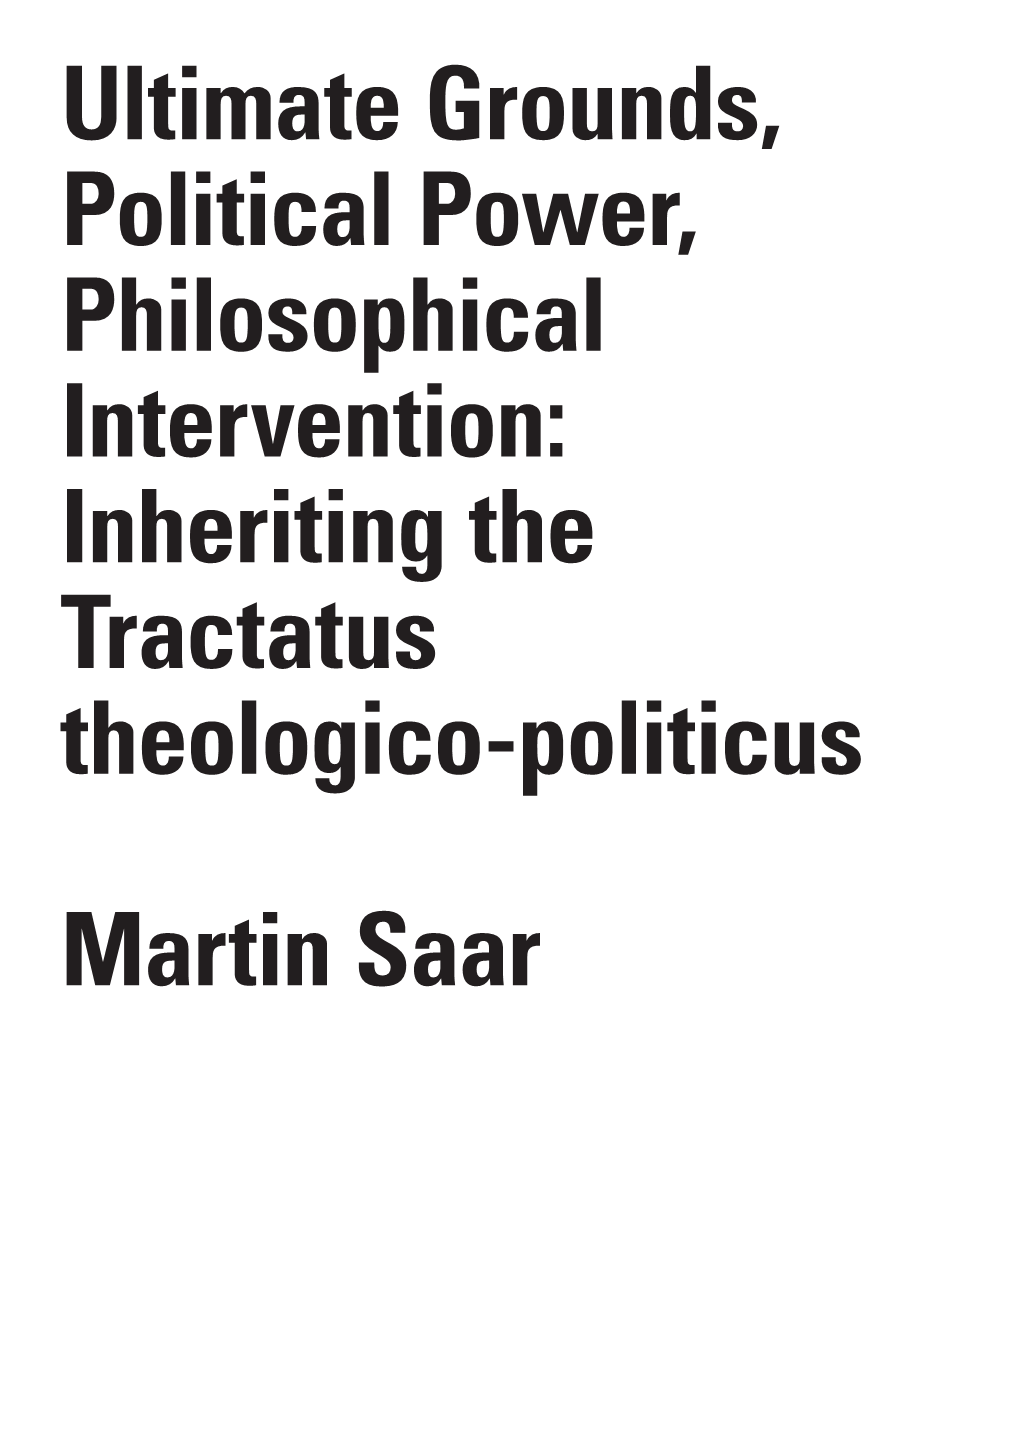 Ultimate Grounds, Political Power, Philosophical Intervention: Inheriting the Tractatus Theologico-Politicus Martin Saar